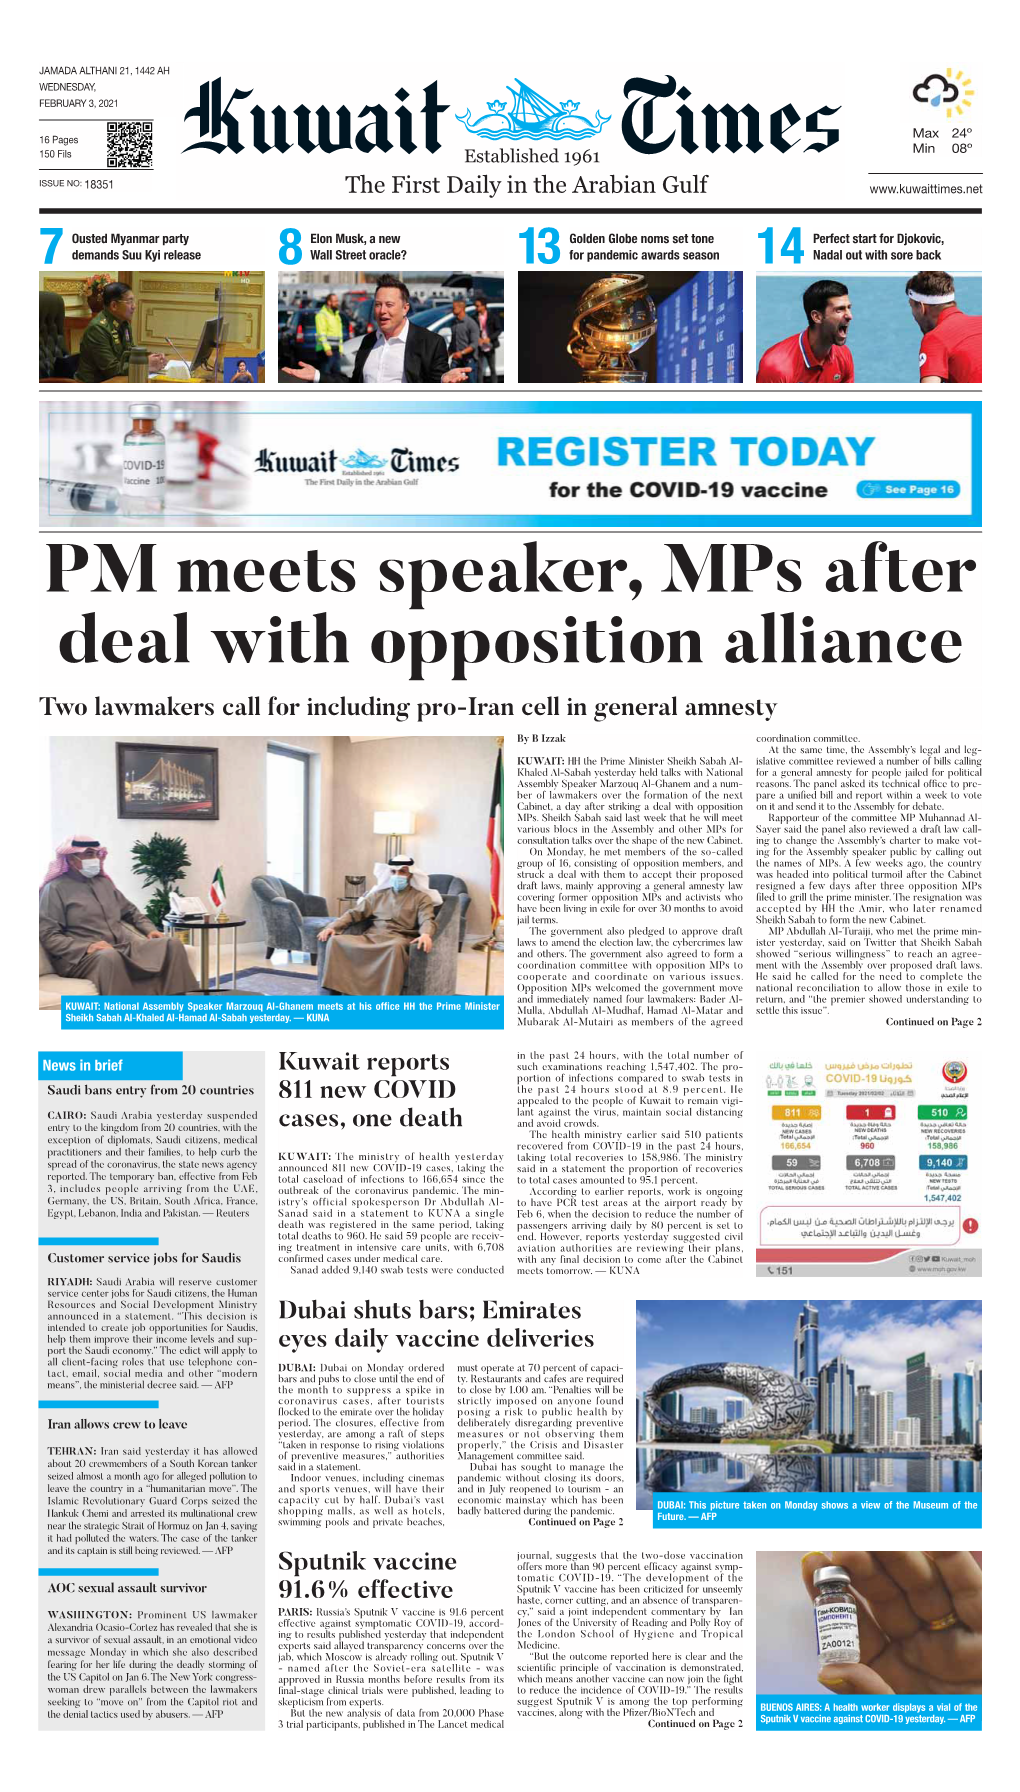 PM Meets Speaker, Mps After Deal with Opposition Alliance